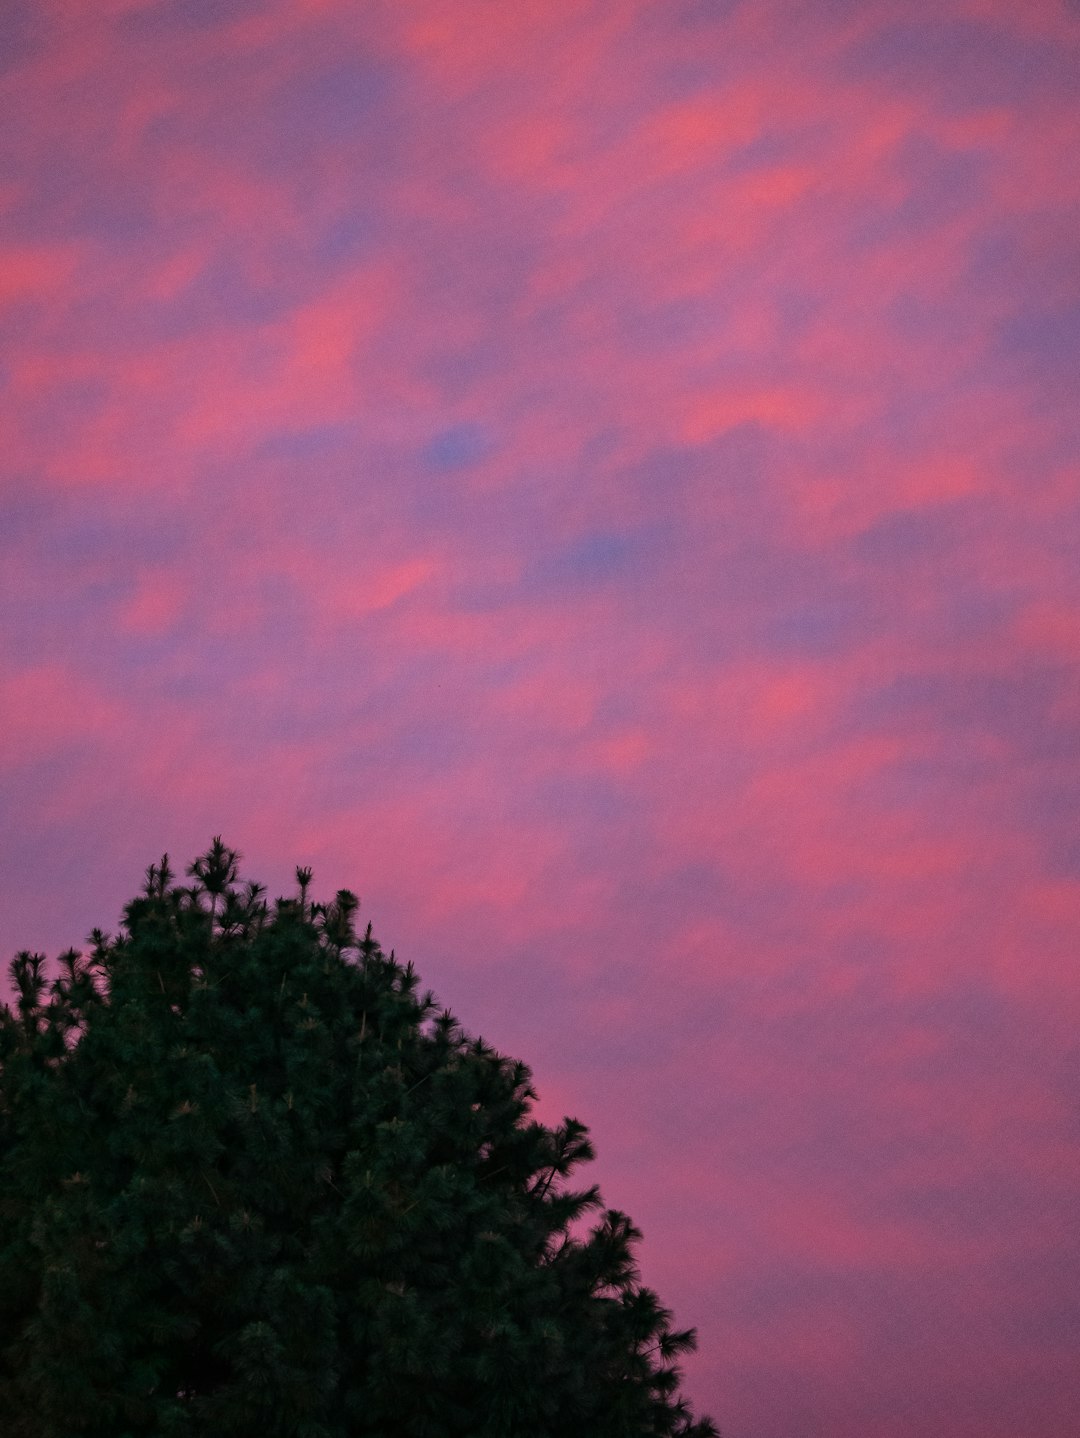 green trees under pink sky